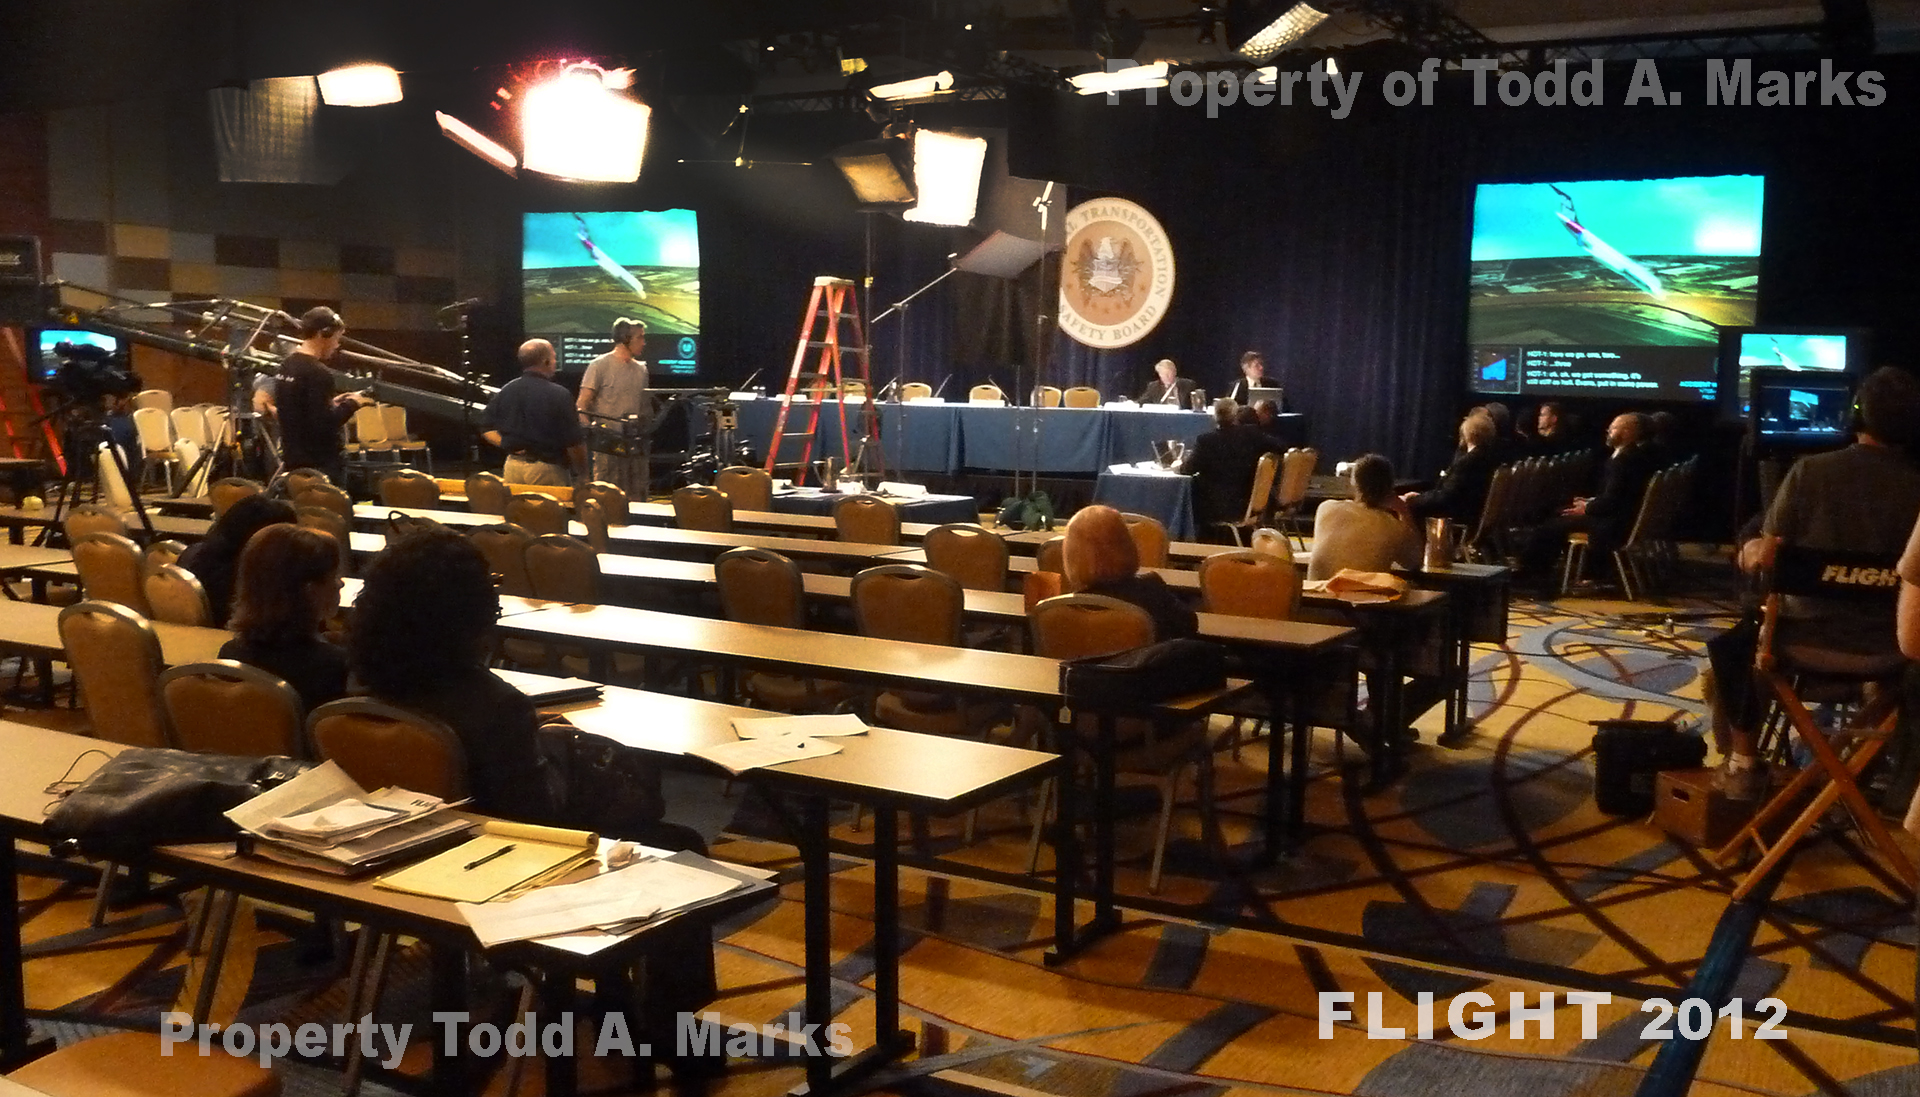 NTSB Hearing - Projection Screens and Monitors showing a simulation from the info on the flight recorder (black box). FLIGHT